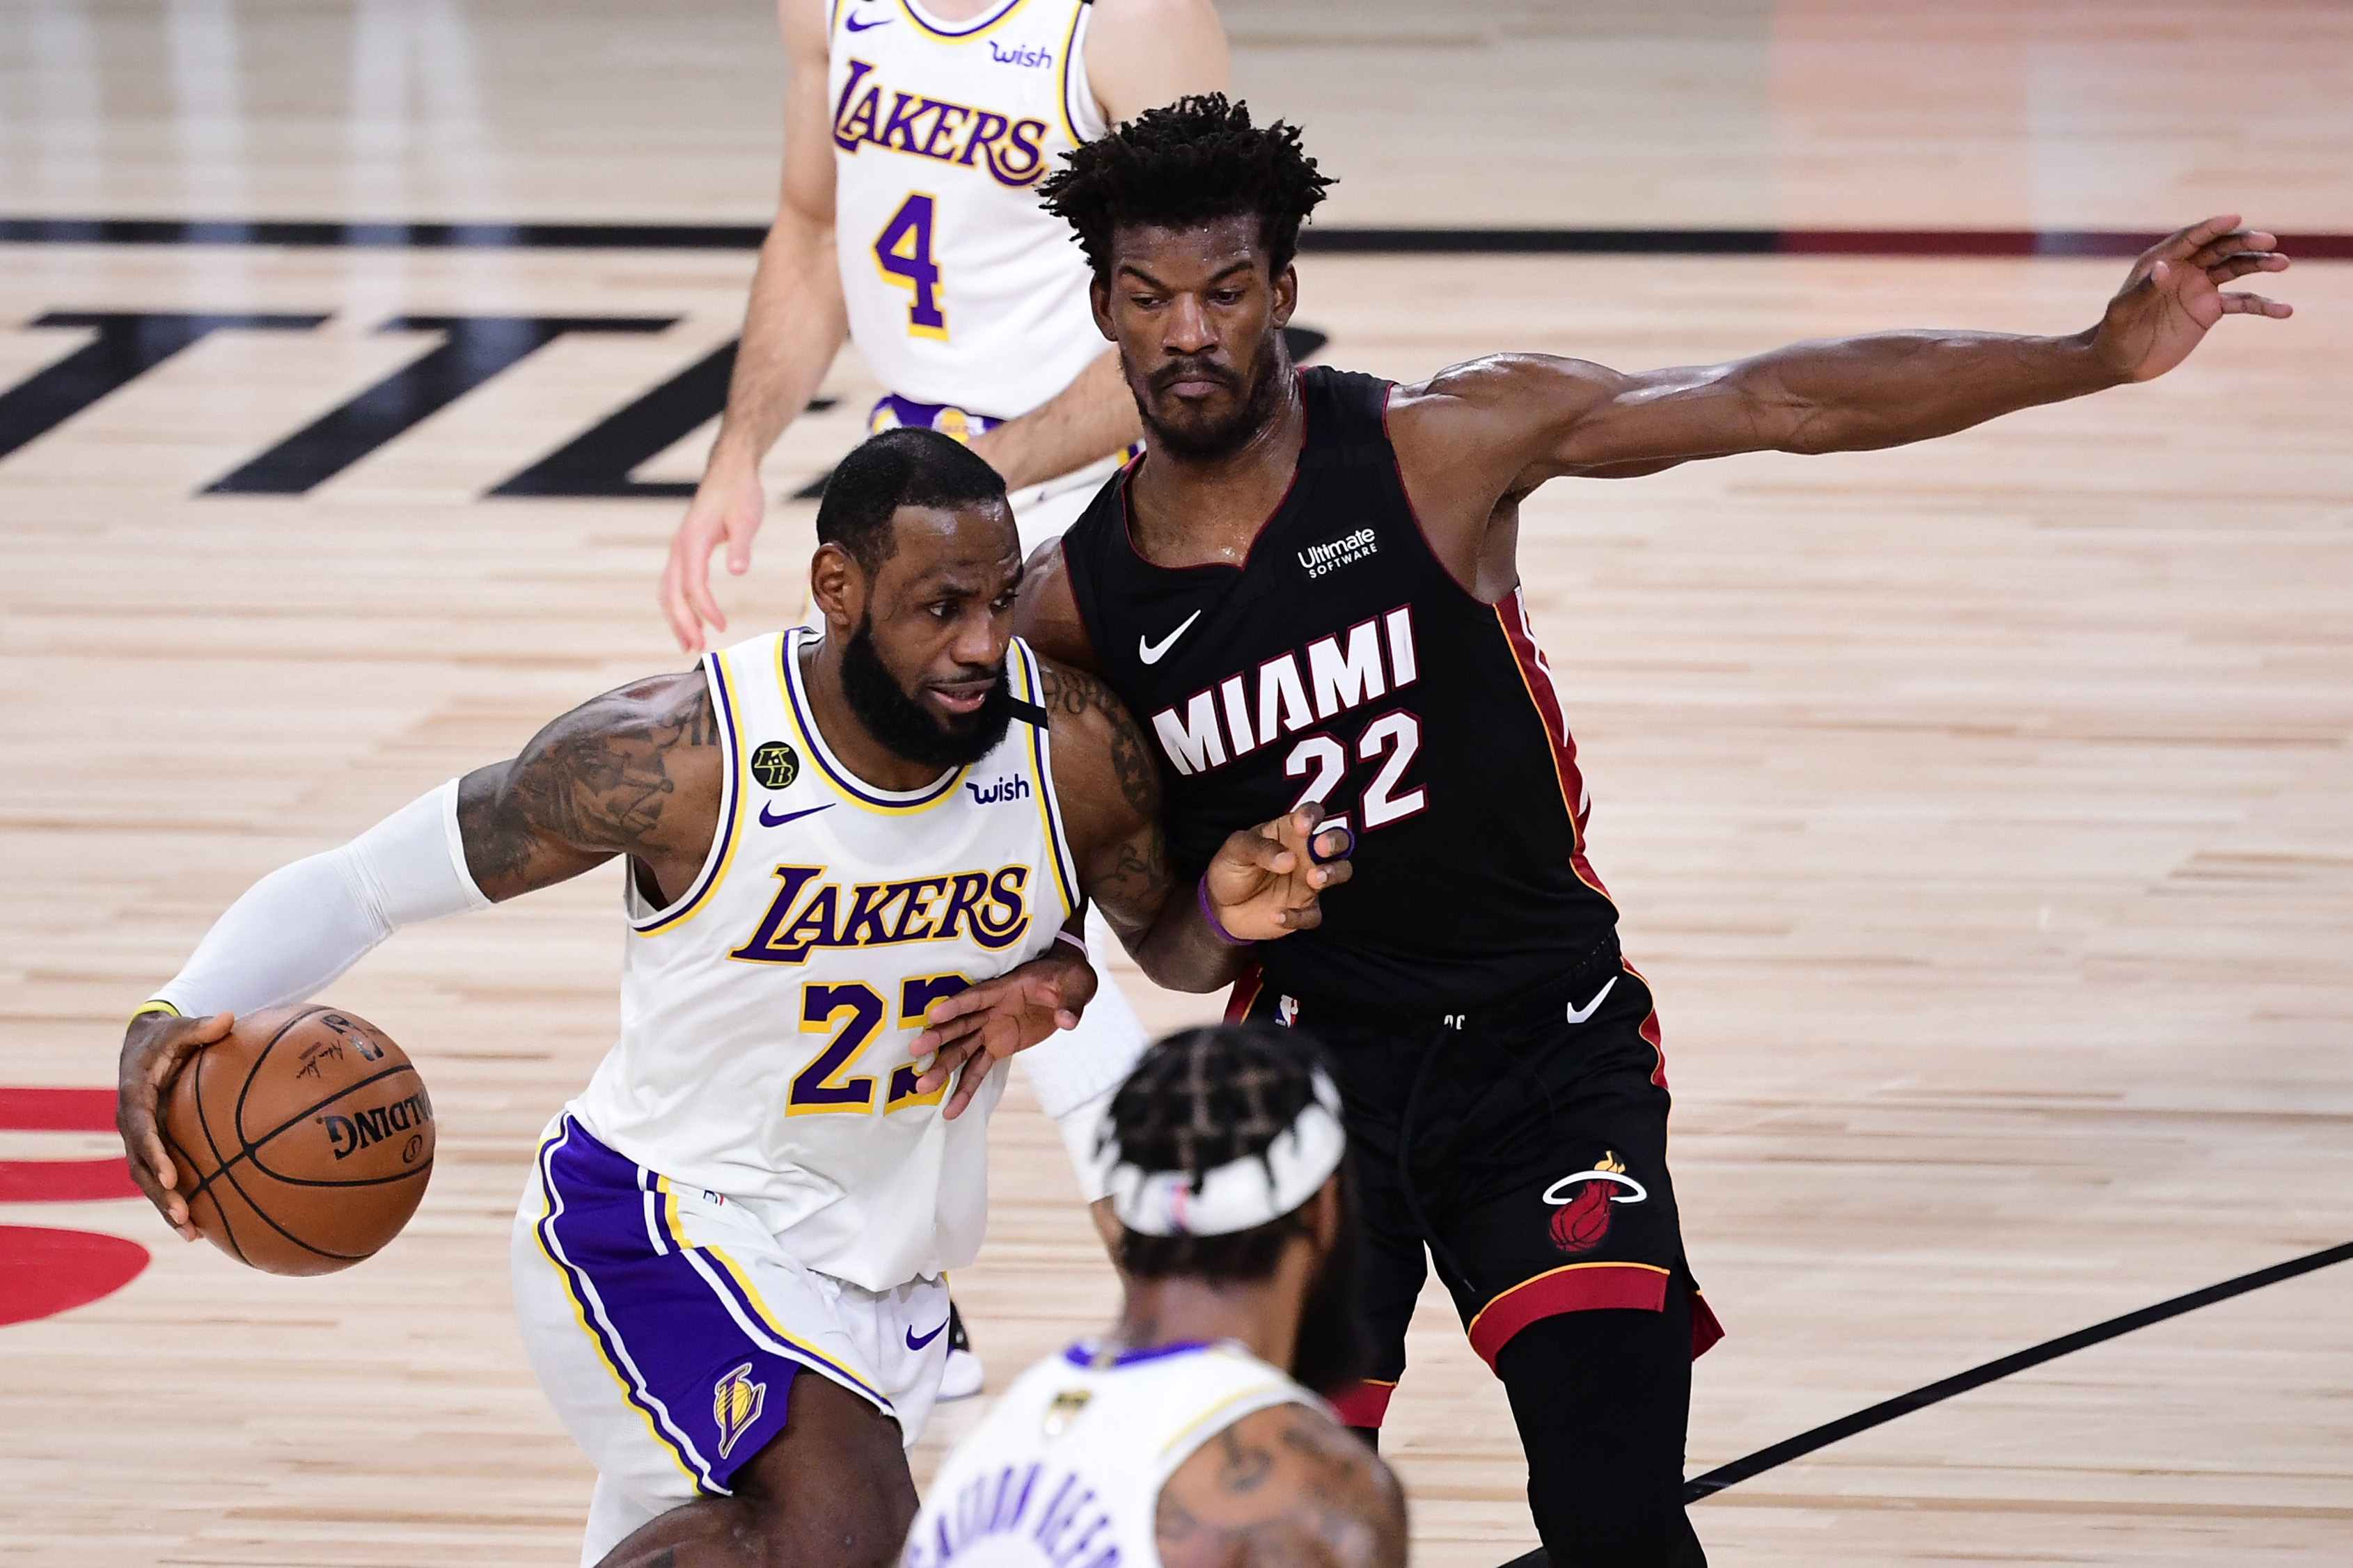 NBA Finals Schedule 2020: Lakers vs. Heat Game 4 Time, Live Stream, TV